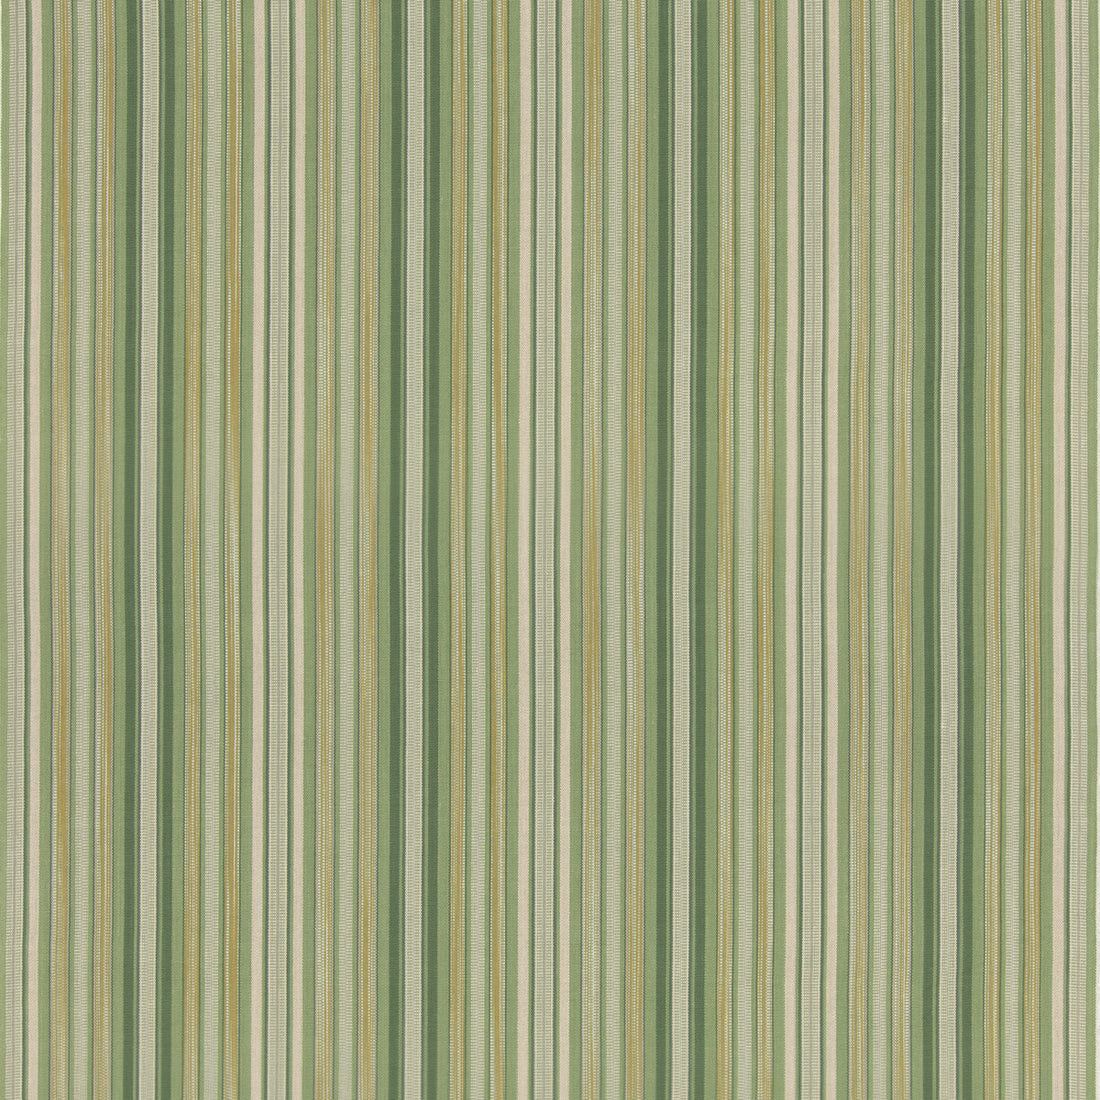 Rainstorm fabric in green color - pattern BF11065.735.0 - by G P &amp; J Baker in the X Kit Kemp Stripes collection